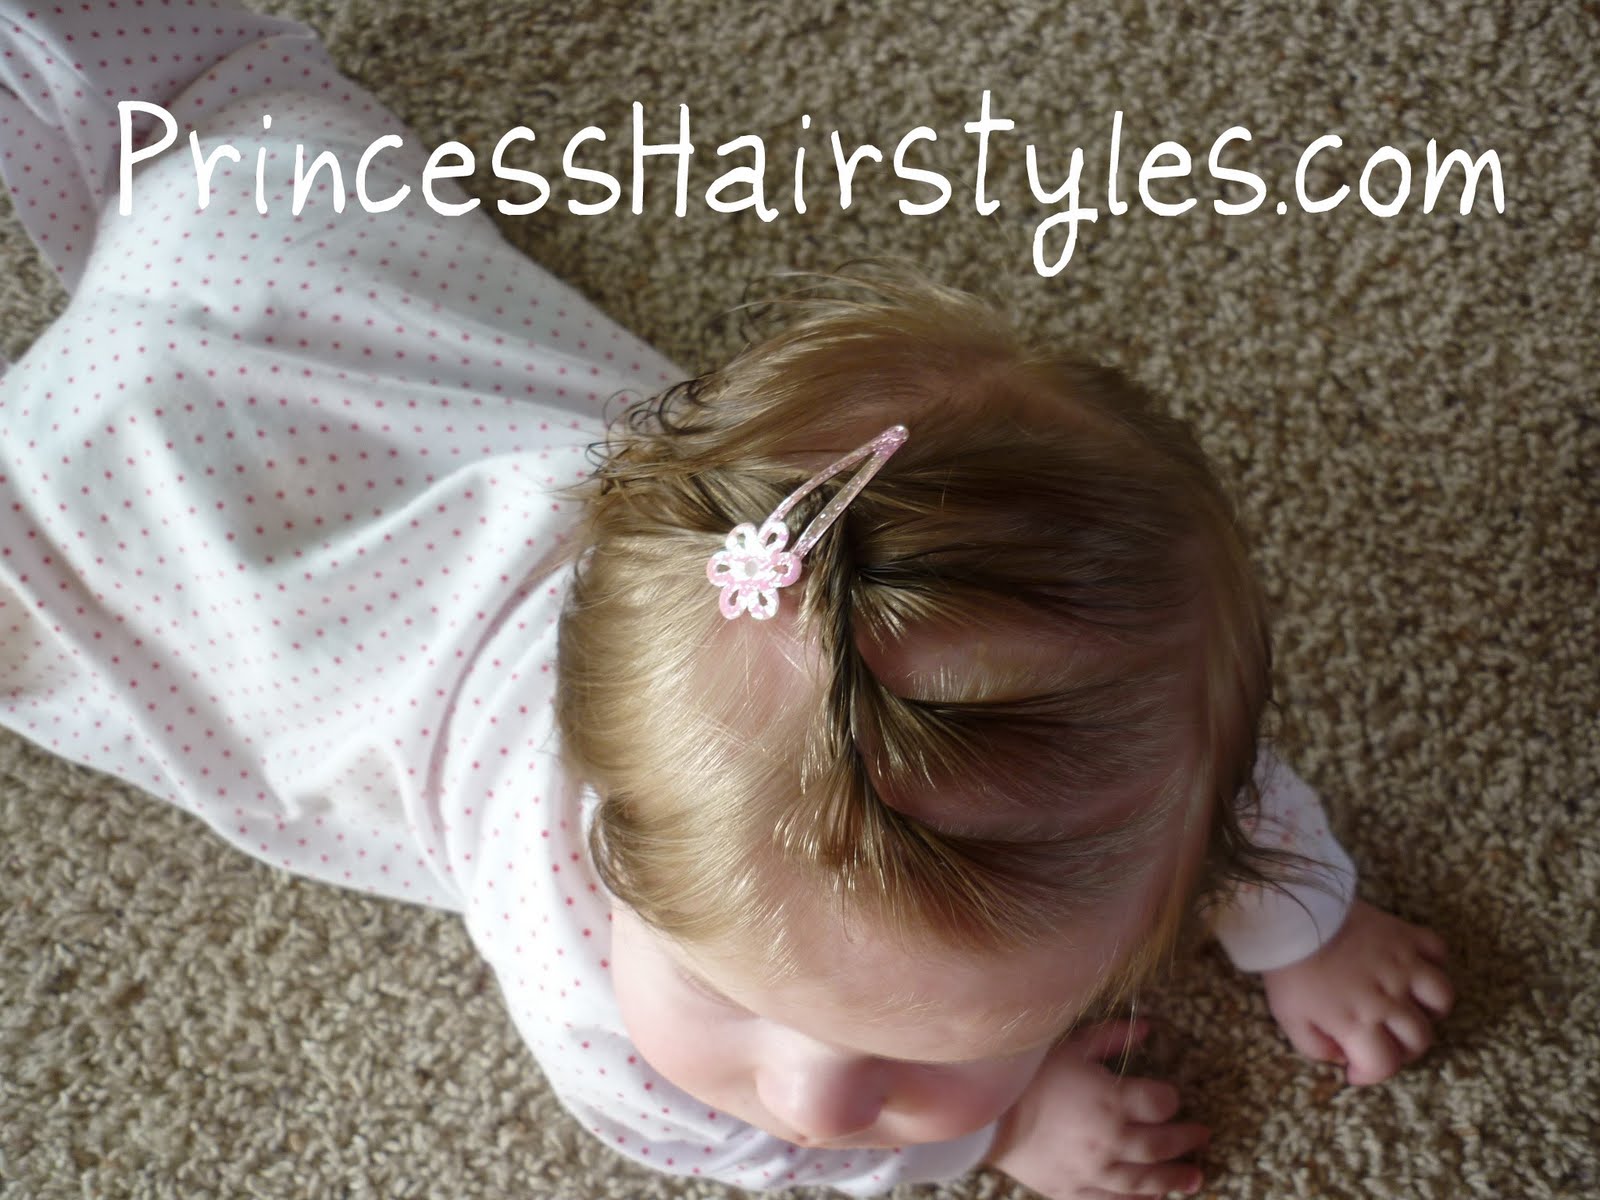 Hairstyles For Girls: Baby Hairstyles - Tiny Twists